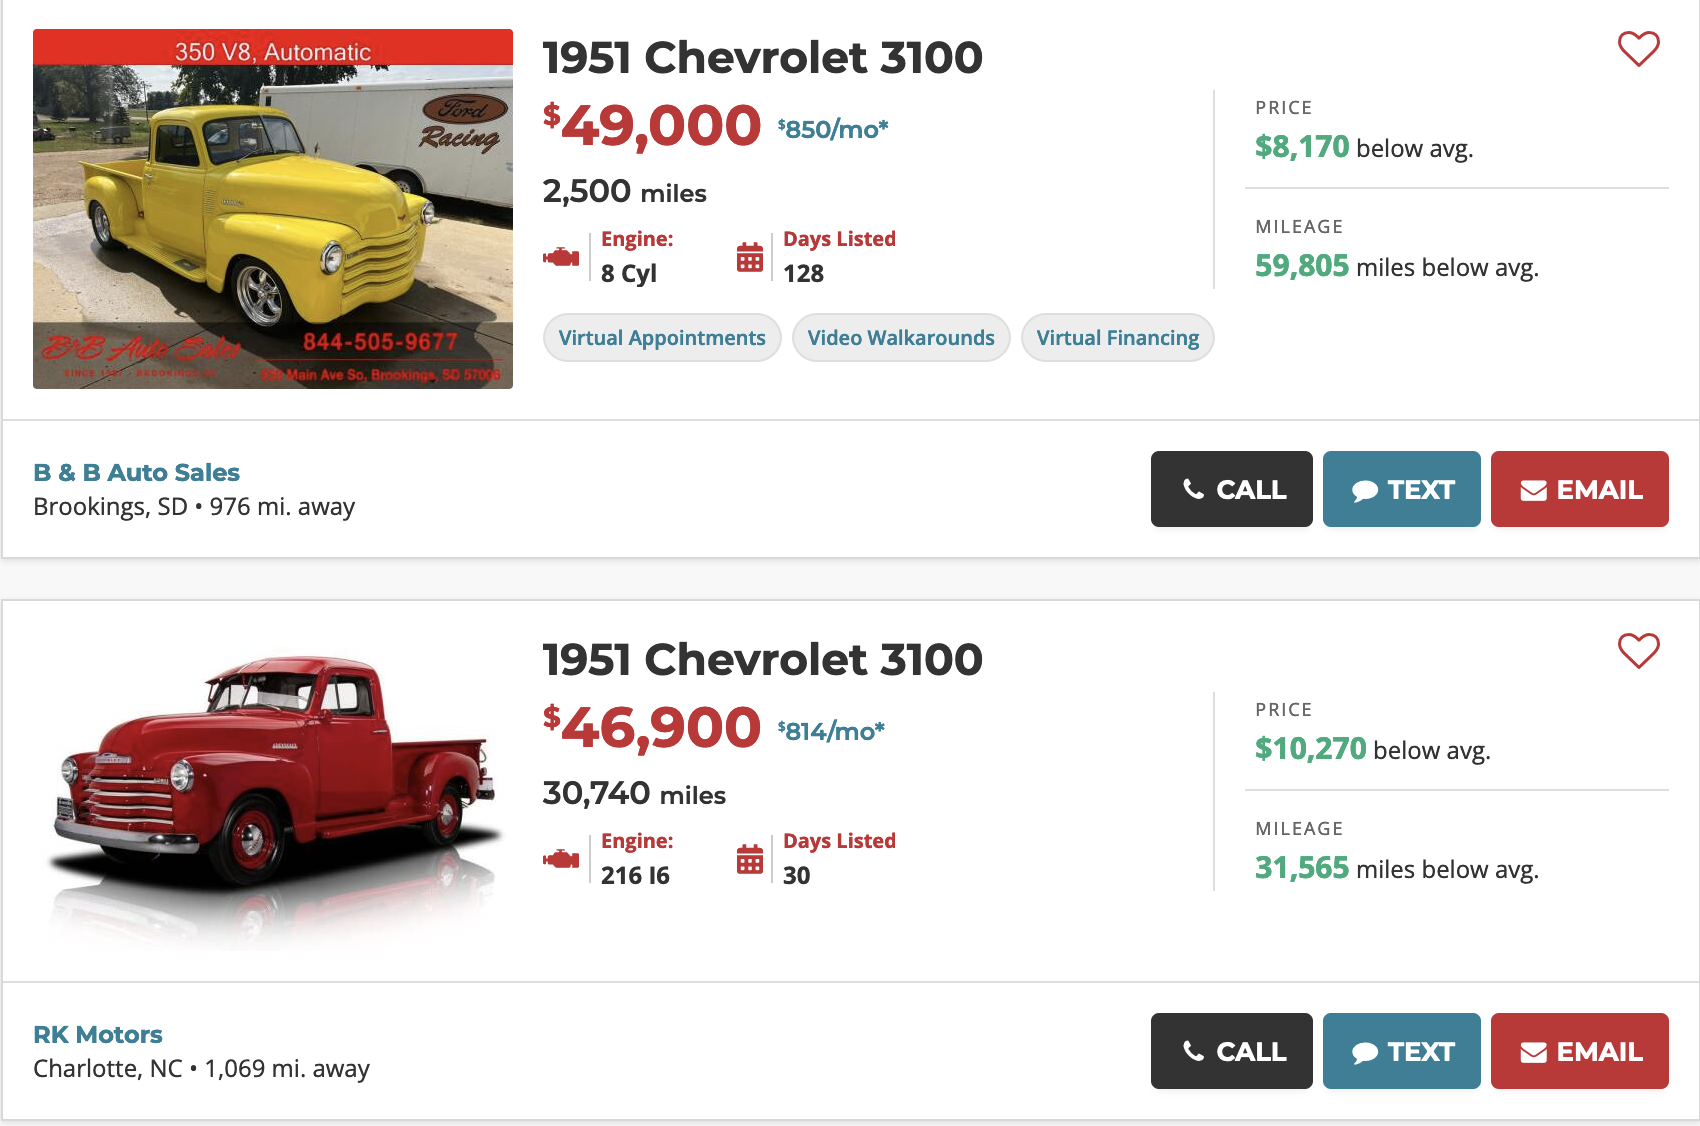 1951 Chevy truck for sale in Texas